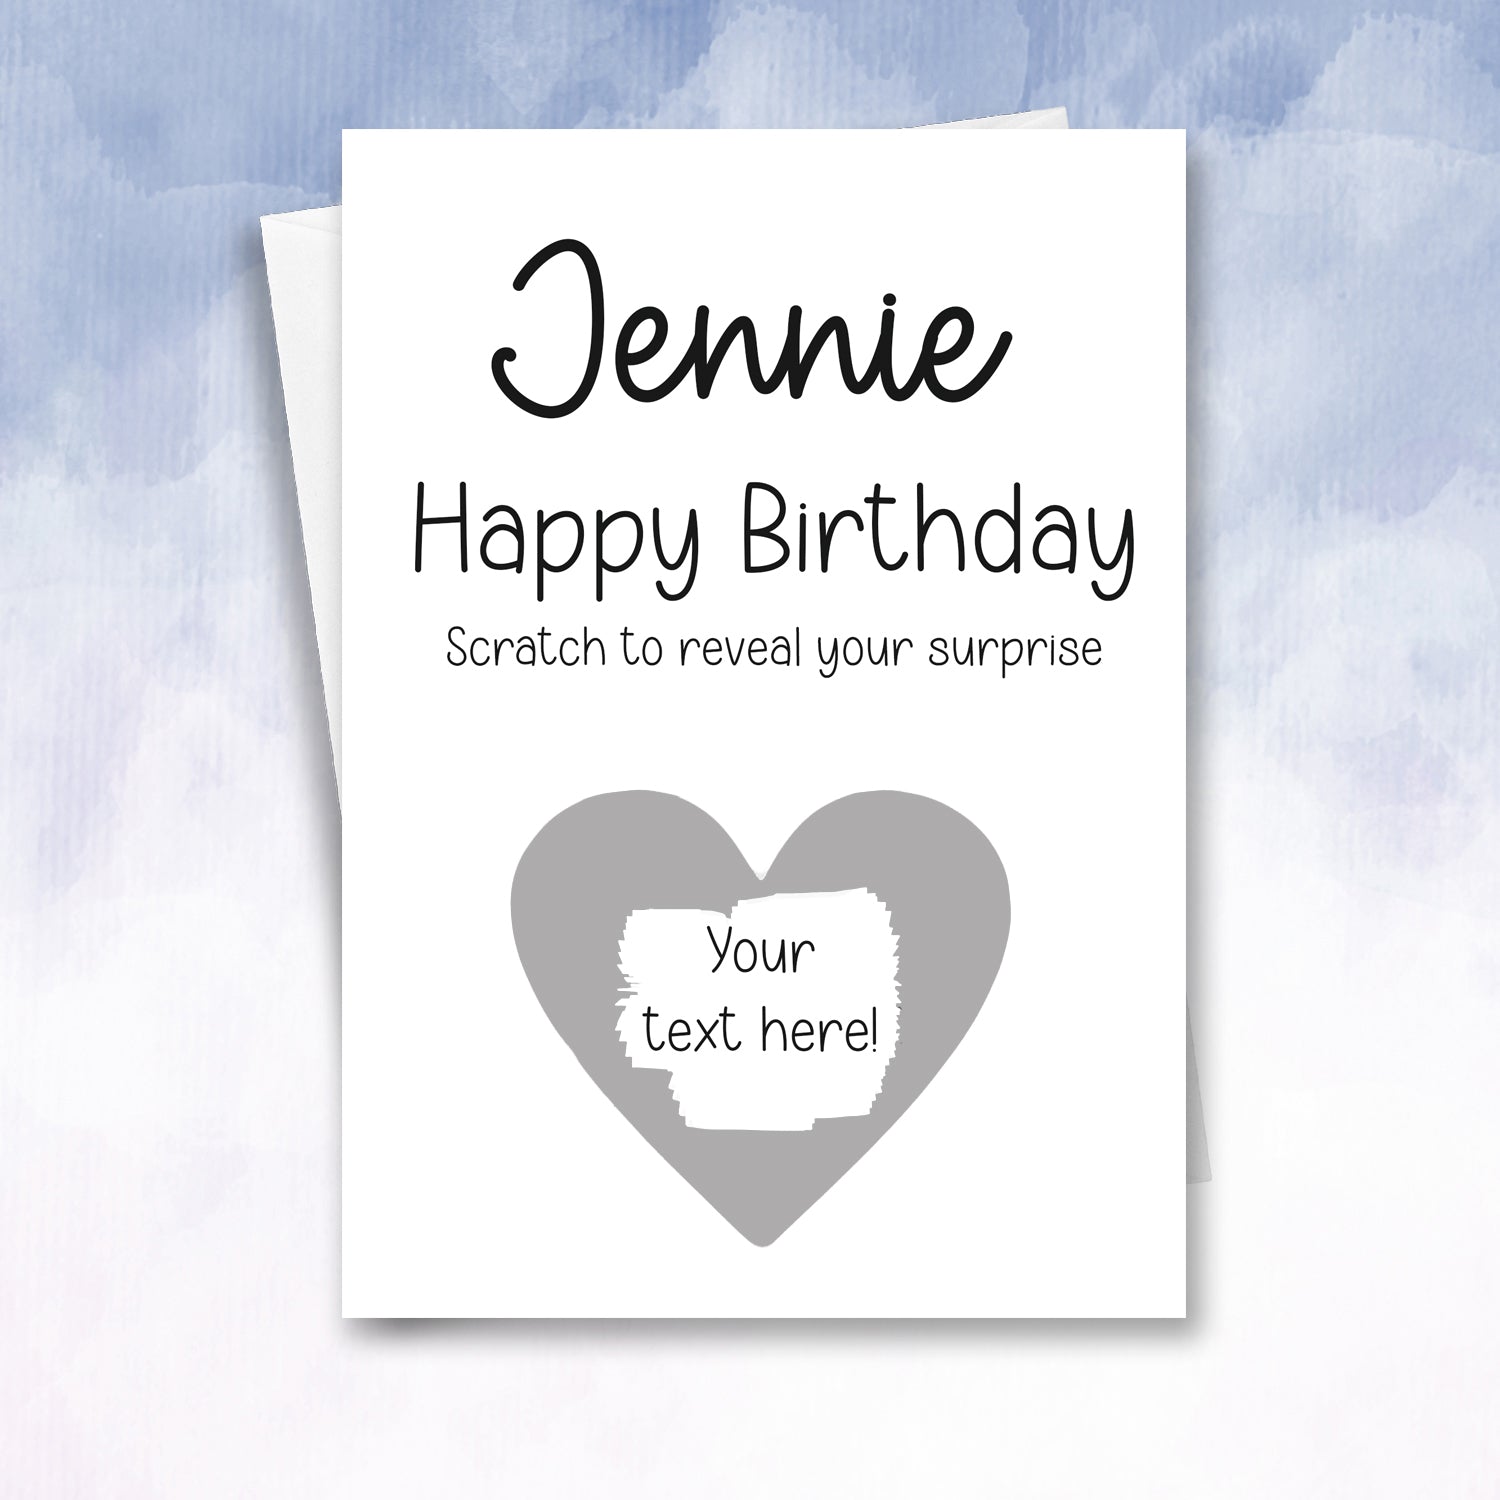 Personalised Scratch off Birthday Reveal Card - 2f75e5-2